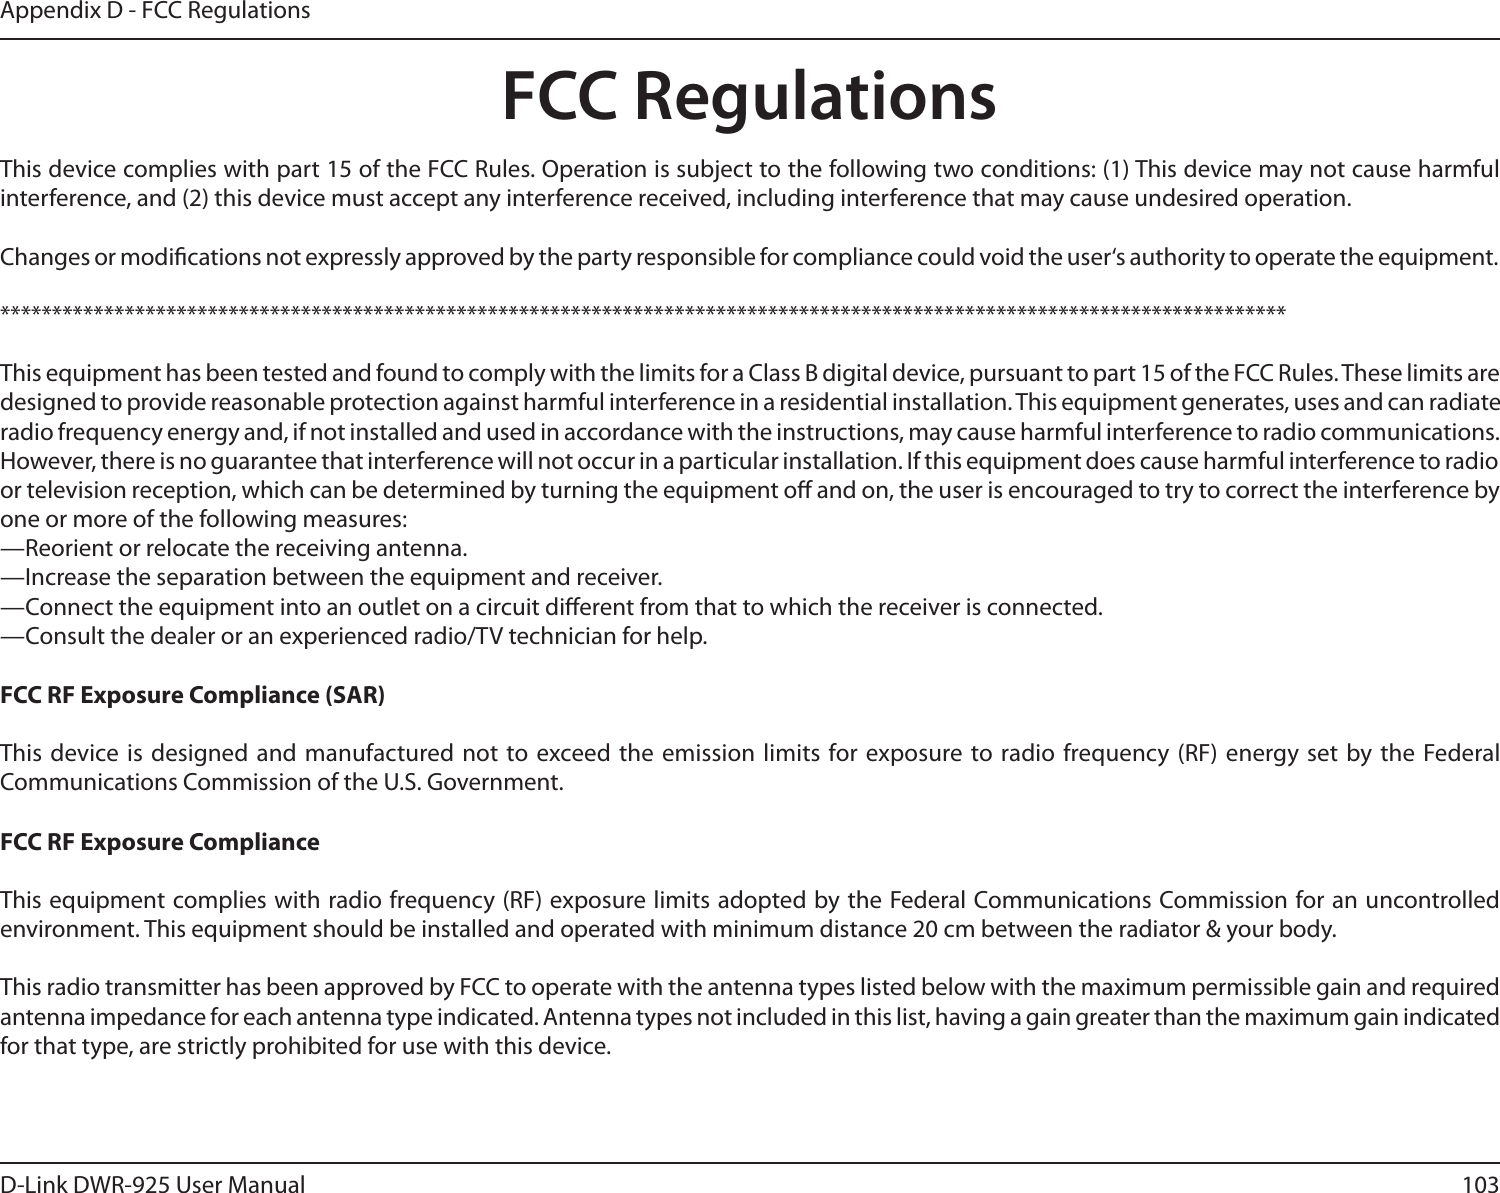 103D-Link DWR-925 User ManualAppendix D - FCC RegulationsFCC Regulationsinterference, and (2) this device must accept any interference received, including interference that may cause undesired operation.Changes or modications not expressly approved by the party responsible for compliance could void the user‘s authority to operate the equipment.This equipment has been tested and found to comply with the limits for a Class B digital device, pursuant to part 15 of the FCC Rules. These limits are designed to provide reasonable protection against harmful interference in a residential installation. This equipment generates, uses and can radiate radio frequency energy and, if not installed and used in accordance with the instructions, may cause harmful interference to radio communications. However, there is no guarantee that interference will not occur in a particular installation. If this equipment does cause harmful interference to radio or television reception, which can be determined by turning the equipment o and on, the user is encouraged to try to correct the interference by one or more of the following measures:—Reorient or relocate the receiving antenna.—Increase the separation between the equipment and receiver.—Connect the equipment into an outlet on a circuit dierent from that to which the receiver is connected.—Consult the dealer or an experienced radio/TV technician for help.FCC RF Exposure Compliance (SAR)This device is designed and manufactured not to exceed the emission limits for exposure to radio frequency (RF) energy set by the Federal Communications Commission of the U.S. Government.FCC RF Exposure ComplianceThis equipment complies with radio frequency (RF) exposure limits adopted by the Federal Communications Commission for an uncontrolled environment. This equipment should be installed and operated with minimum distance 20 cm between the radiator &amp; your body.This radio transmitter has been approved by FCC to operate with the antenna types listed below with the maximum permissible gain and required antenna impedance for each antenna type indicated. Antenna types not included in this list, having a gain greater than the maximum gain indicated for that type, are strictly prohibited for use with this device.